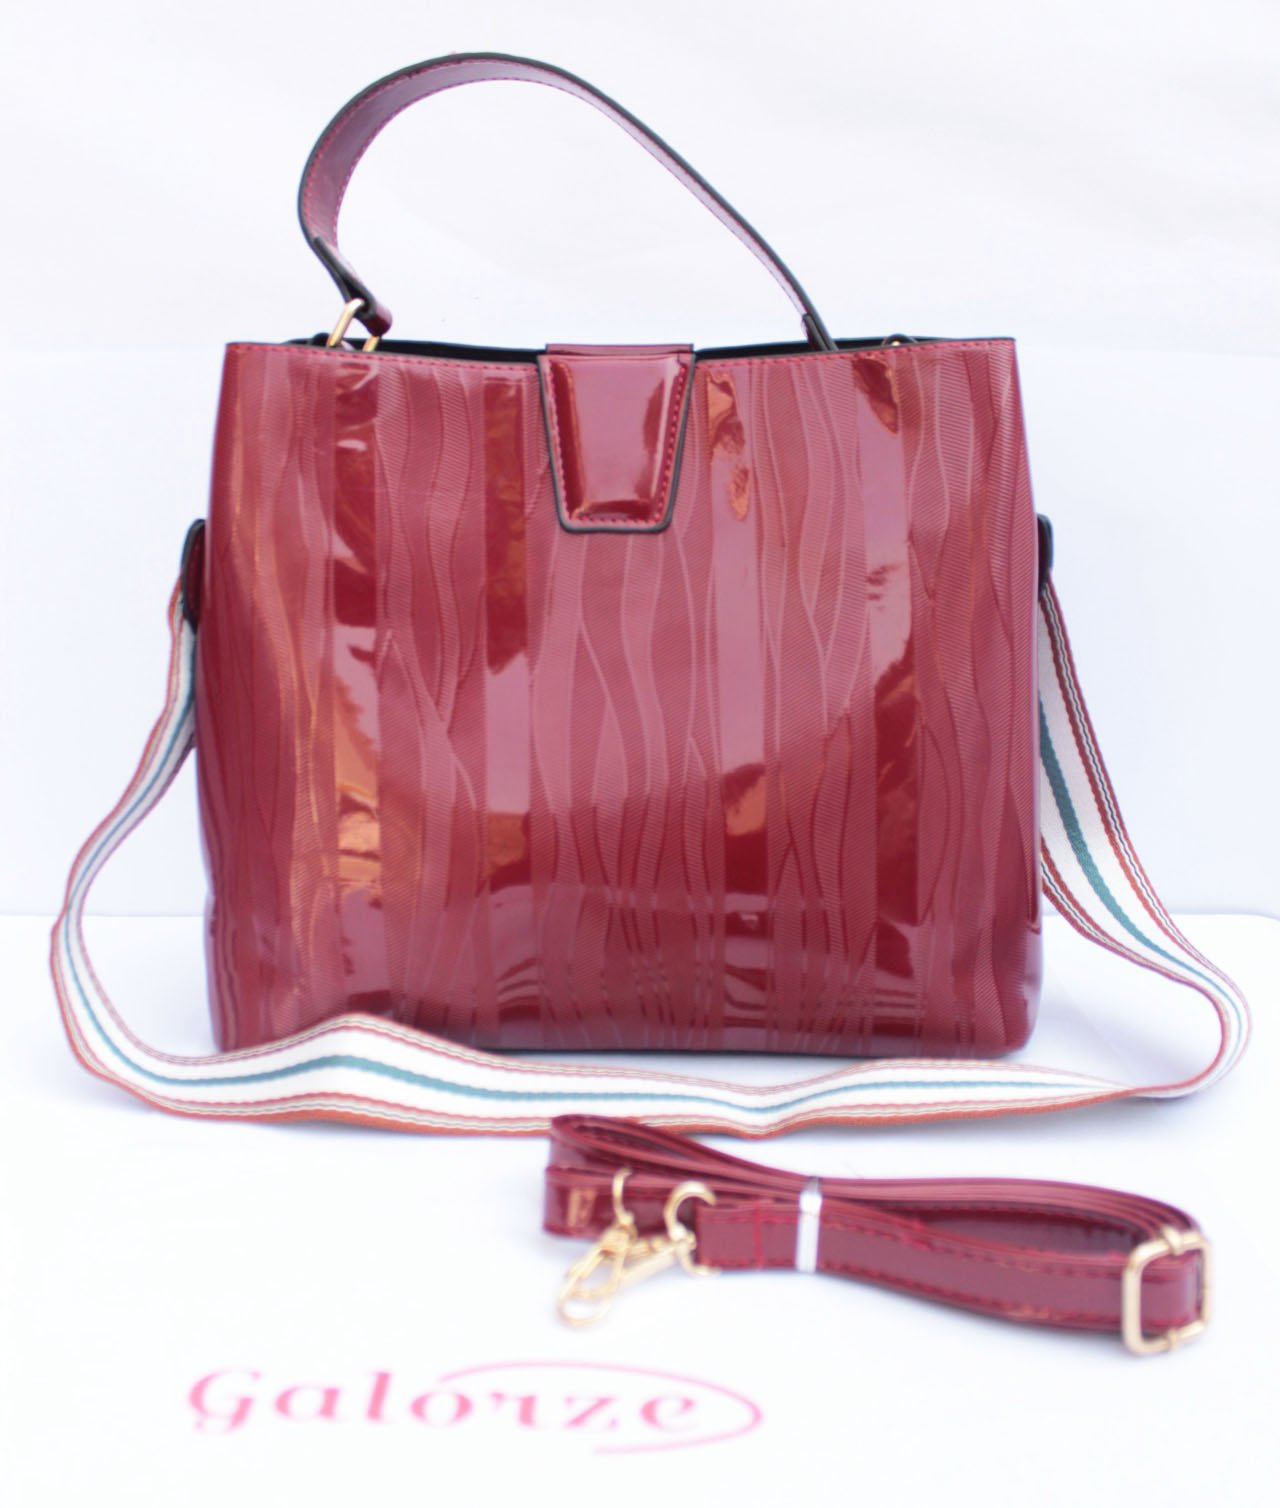 Galorze: Glossy red handbags for women and girls of all ages.